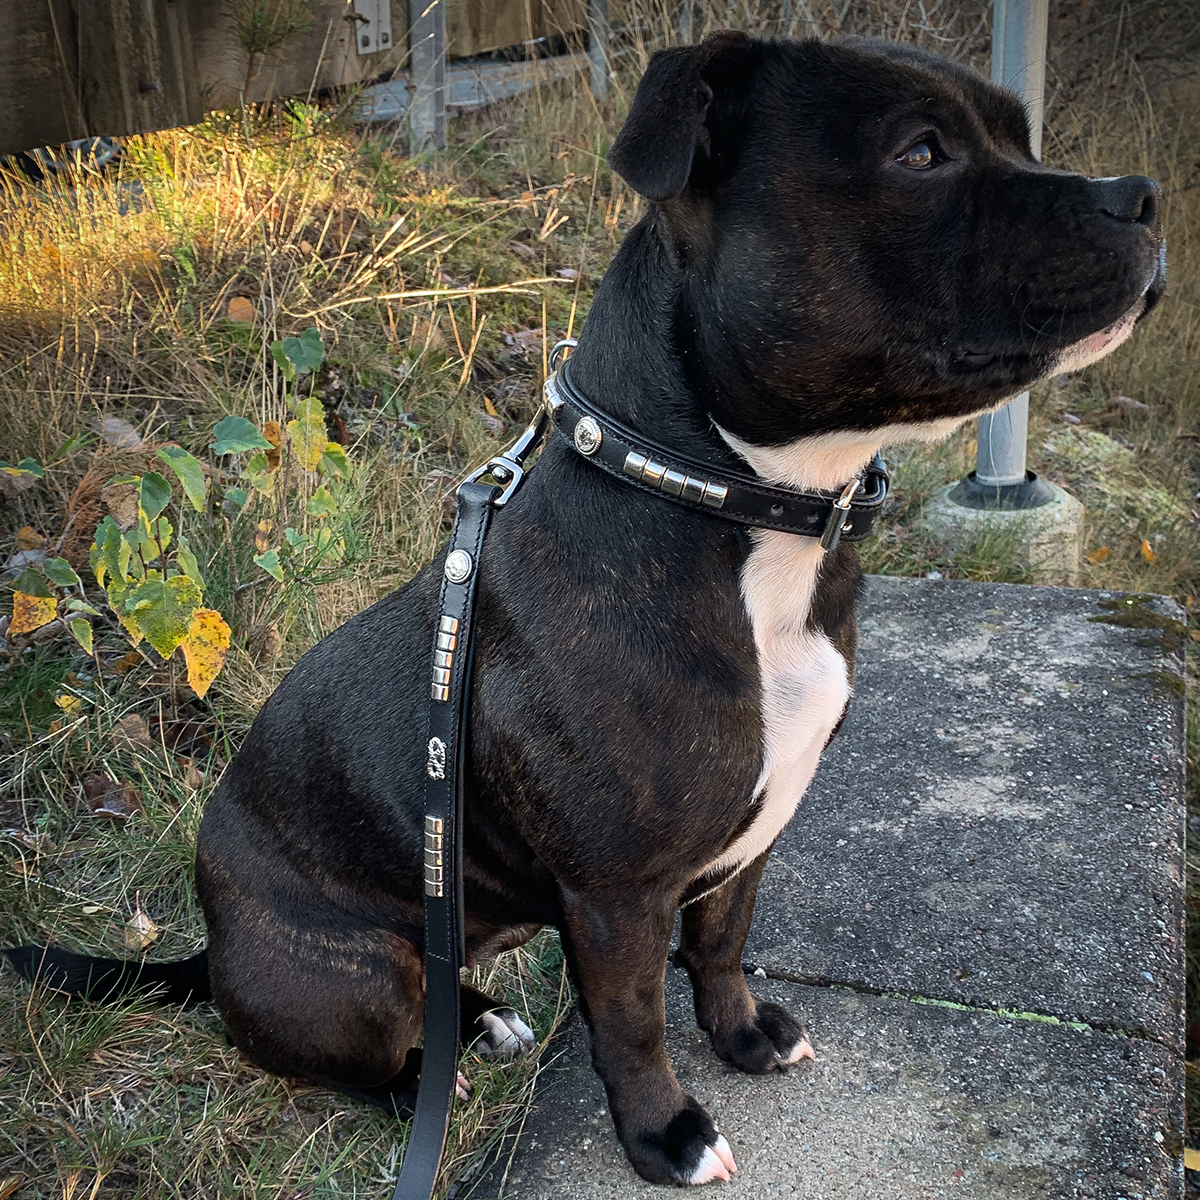 Leather Collar & Leash Set - Pied Piper - Black/Silver - Staffordshire Bull Terrier 1935